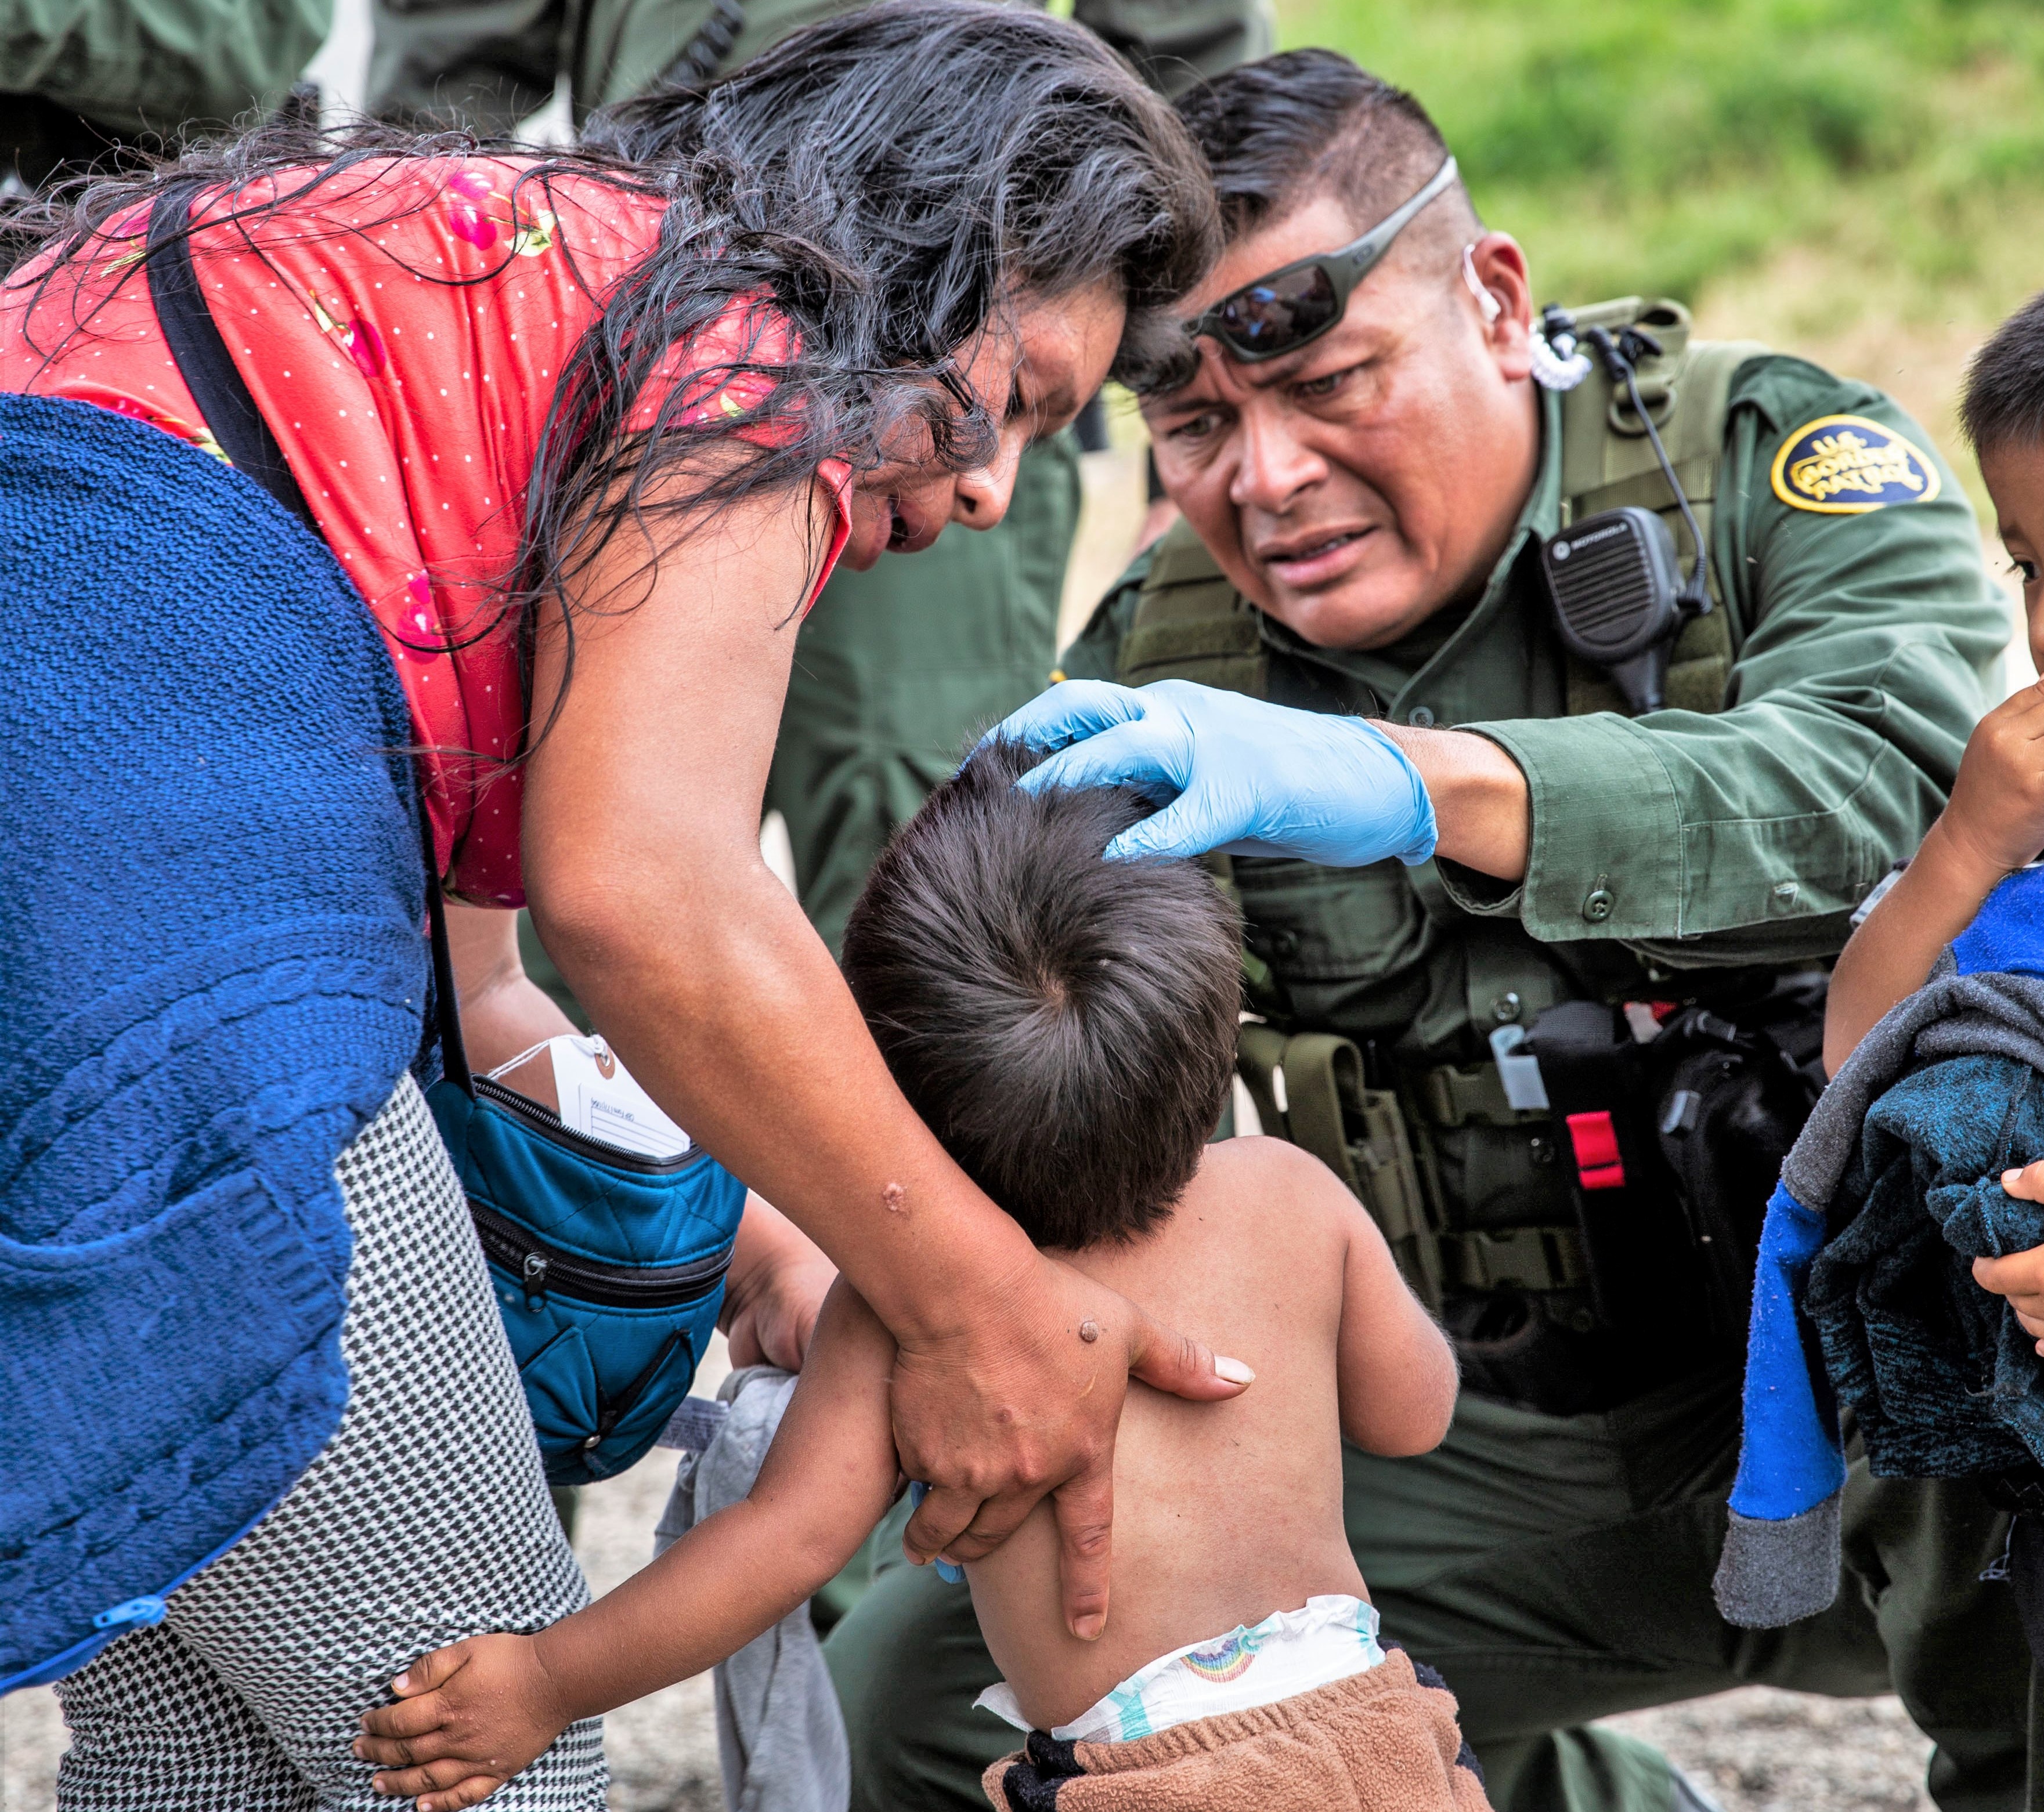 Border Patrol agent offers medical care to child